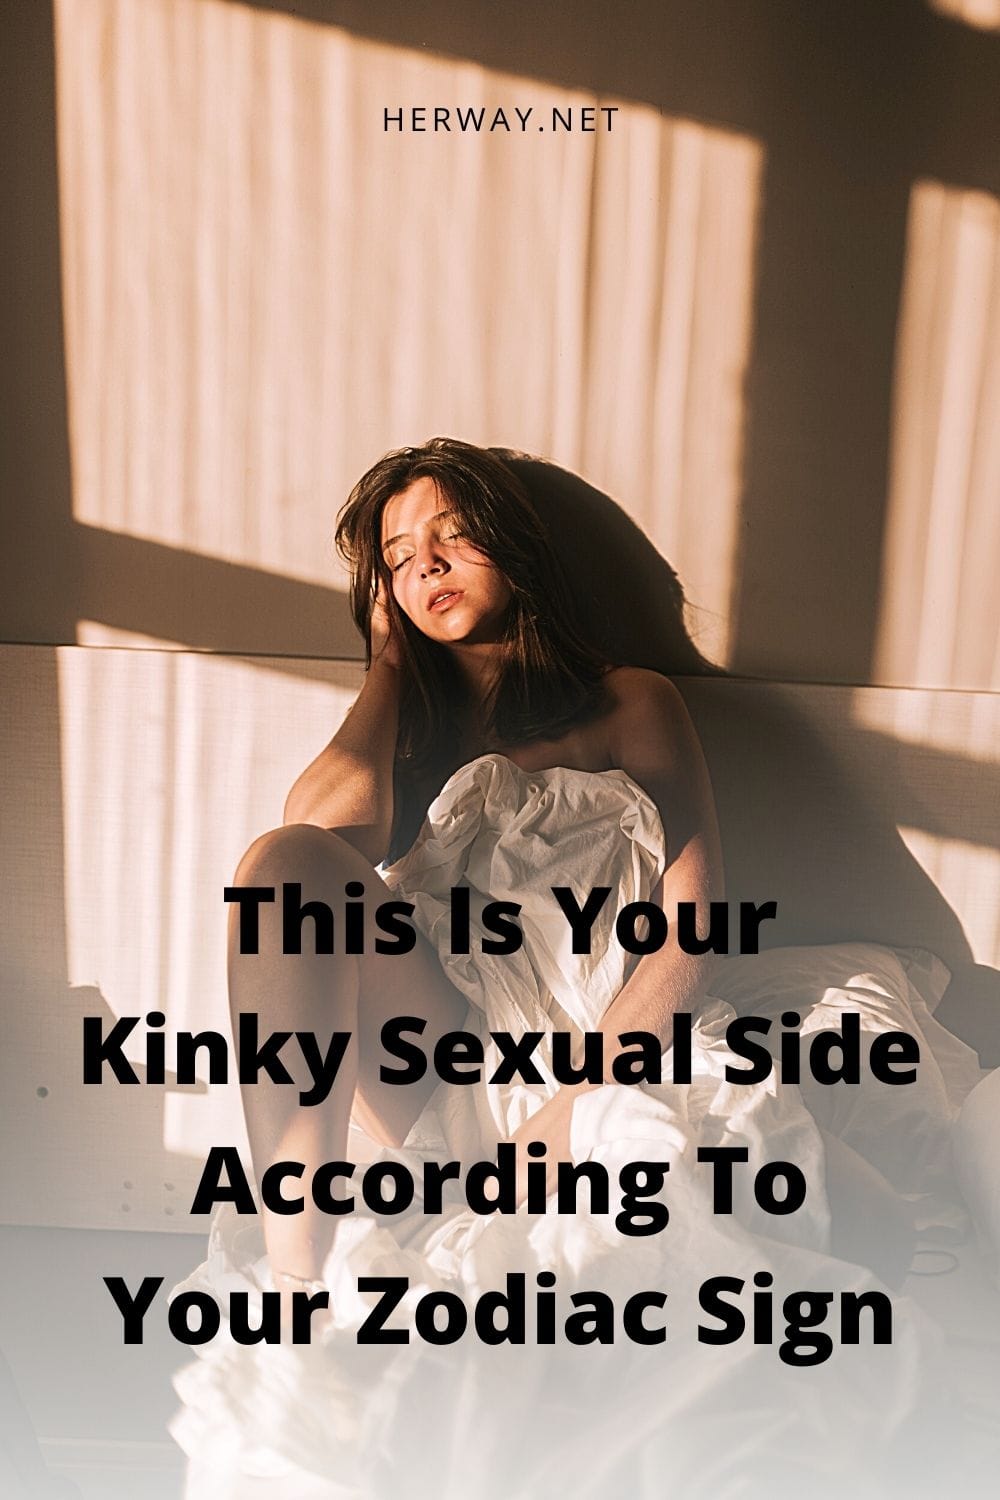 This Is Your Kinky Sexual Side According To Your Zodiac Sign